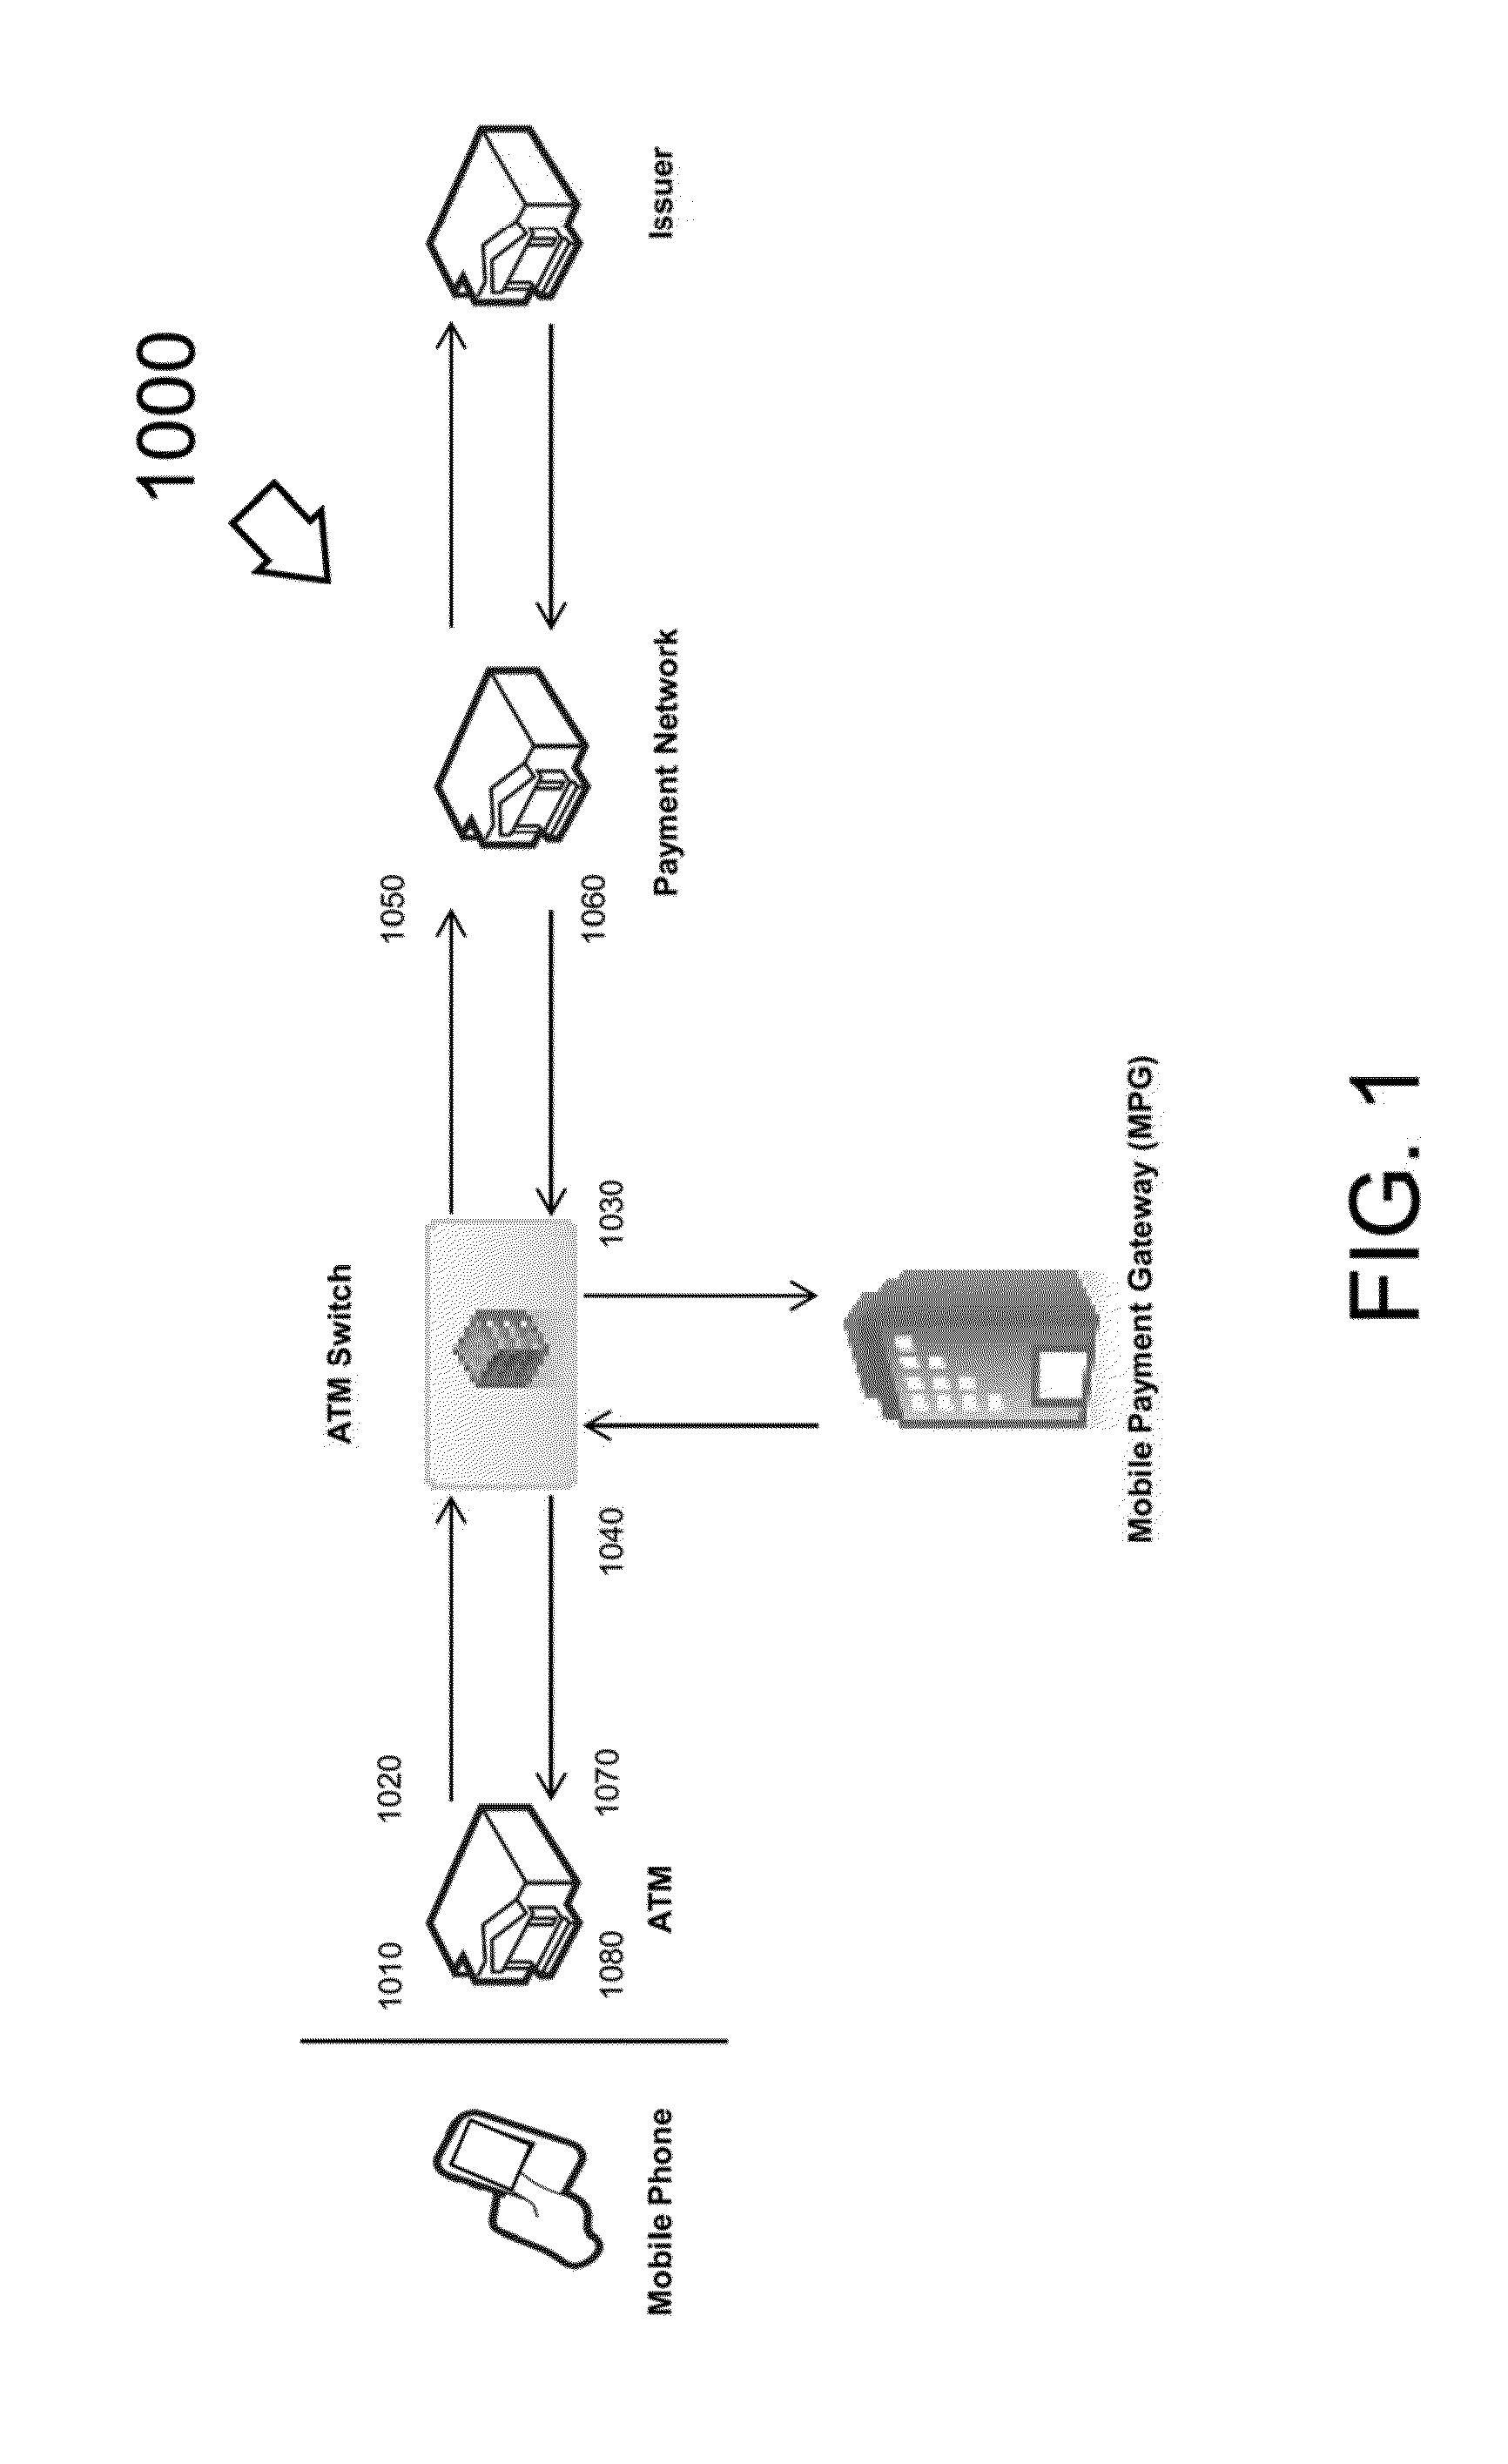 System and Method of Electronic Authentication at a Computer Initiated Via Mobile